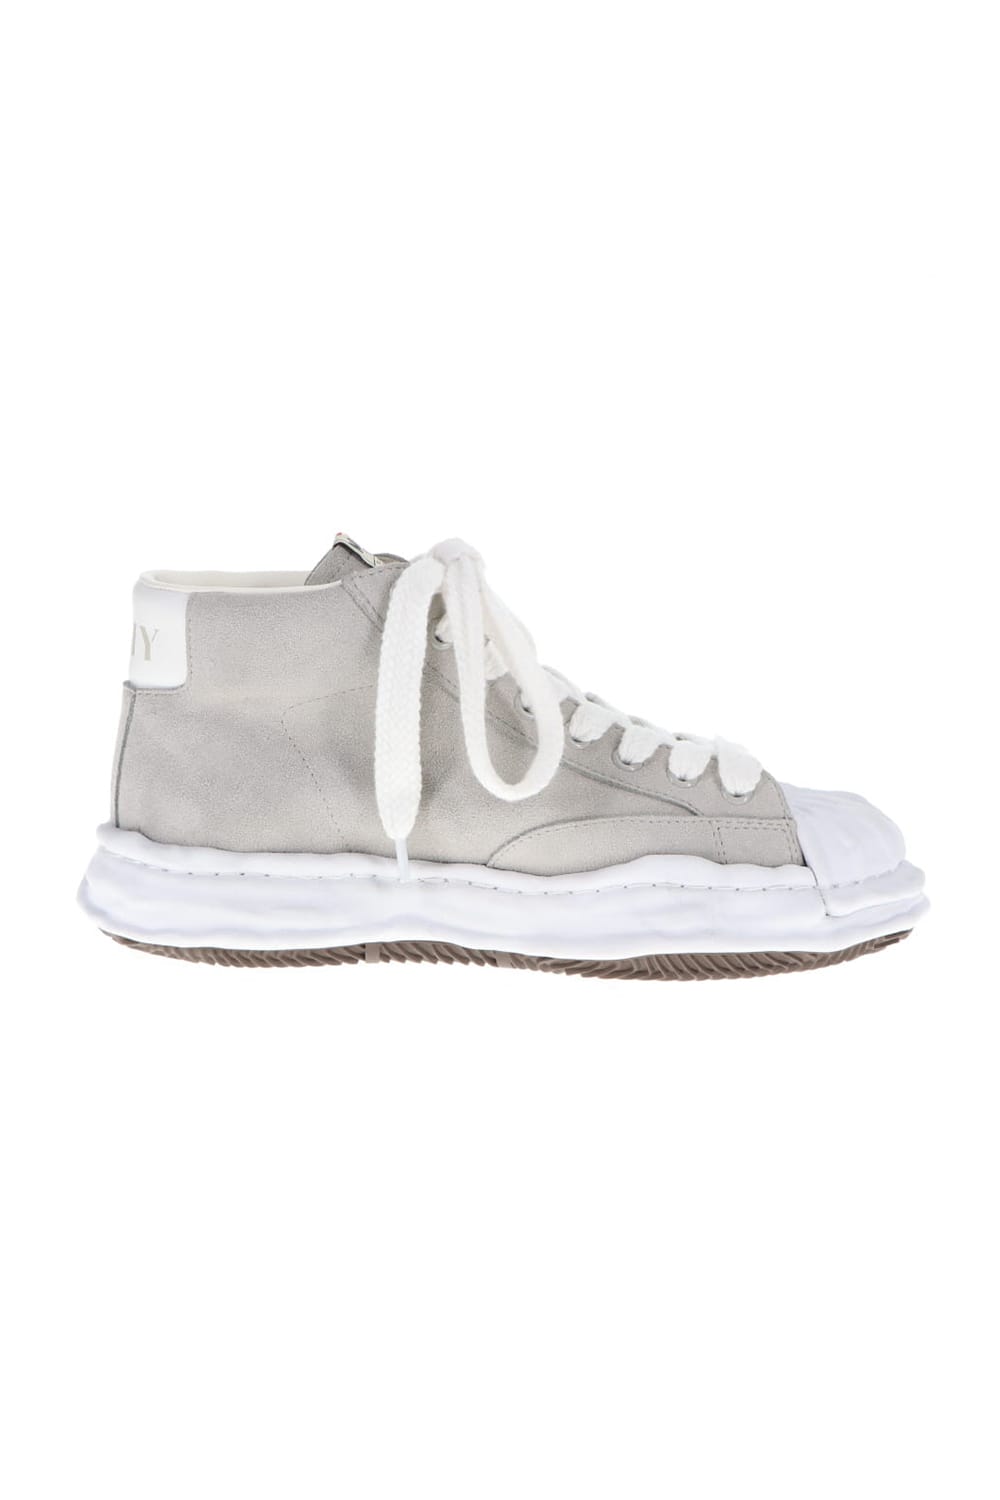 -BLAKEY high- original STC sole suede leather High-Top sneakers White